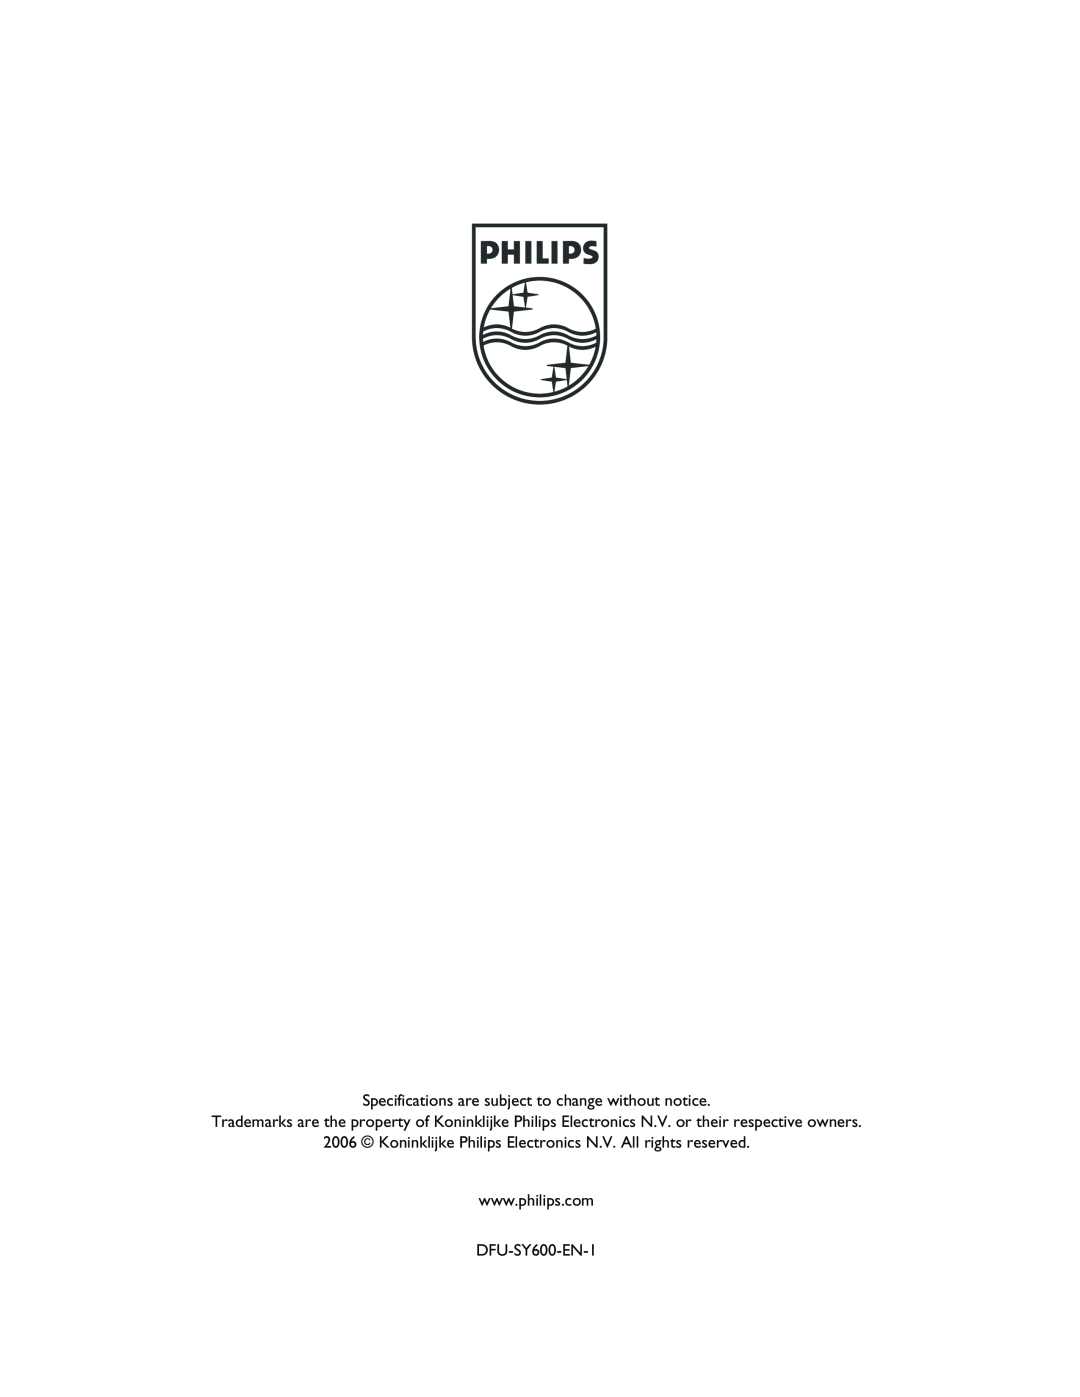 Philips SYE5600 user manual Specifications are subject to change without notice, DFU-SY600-EN-1 